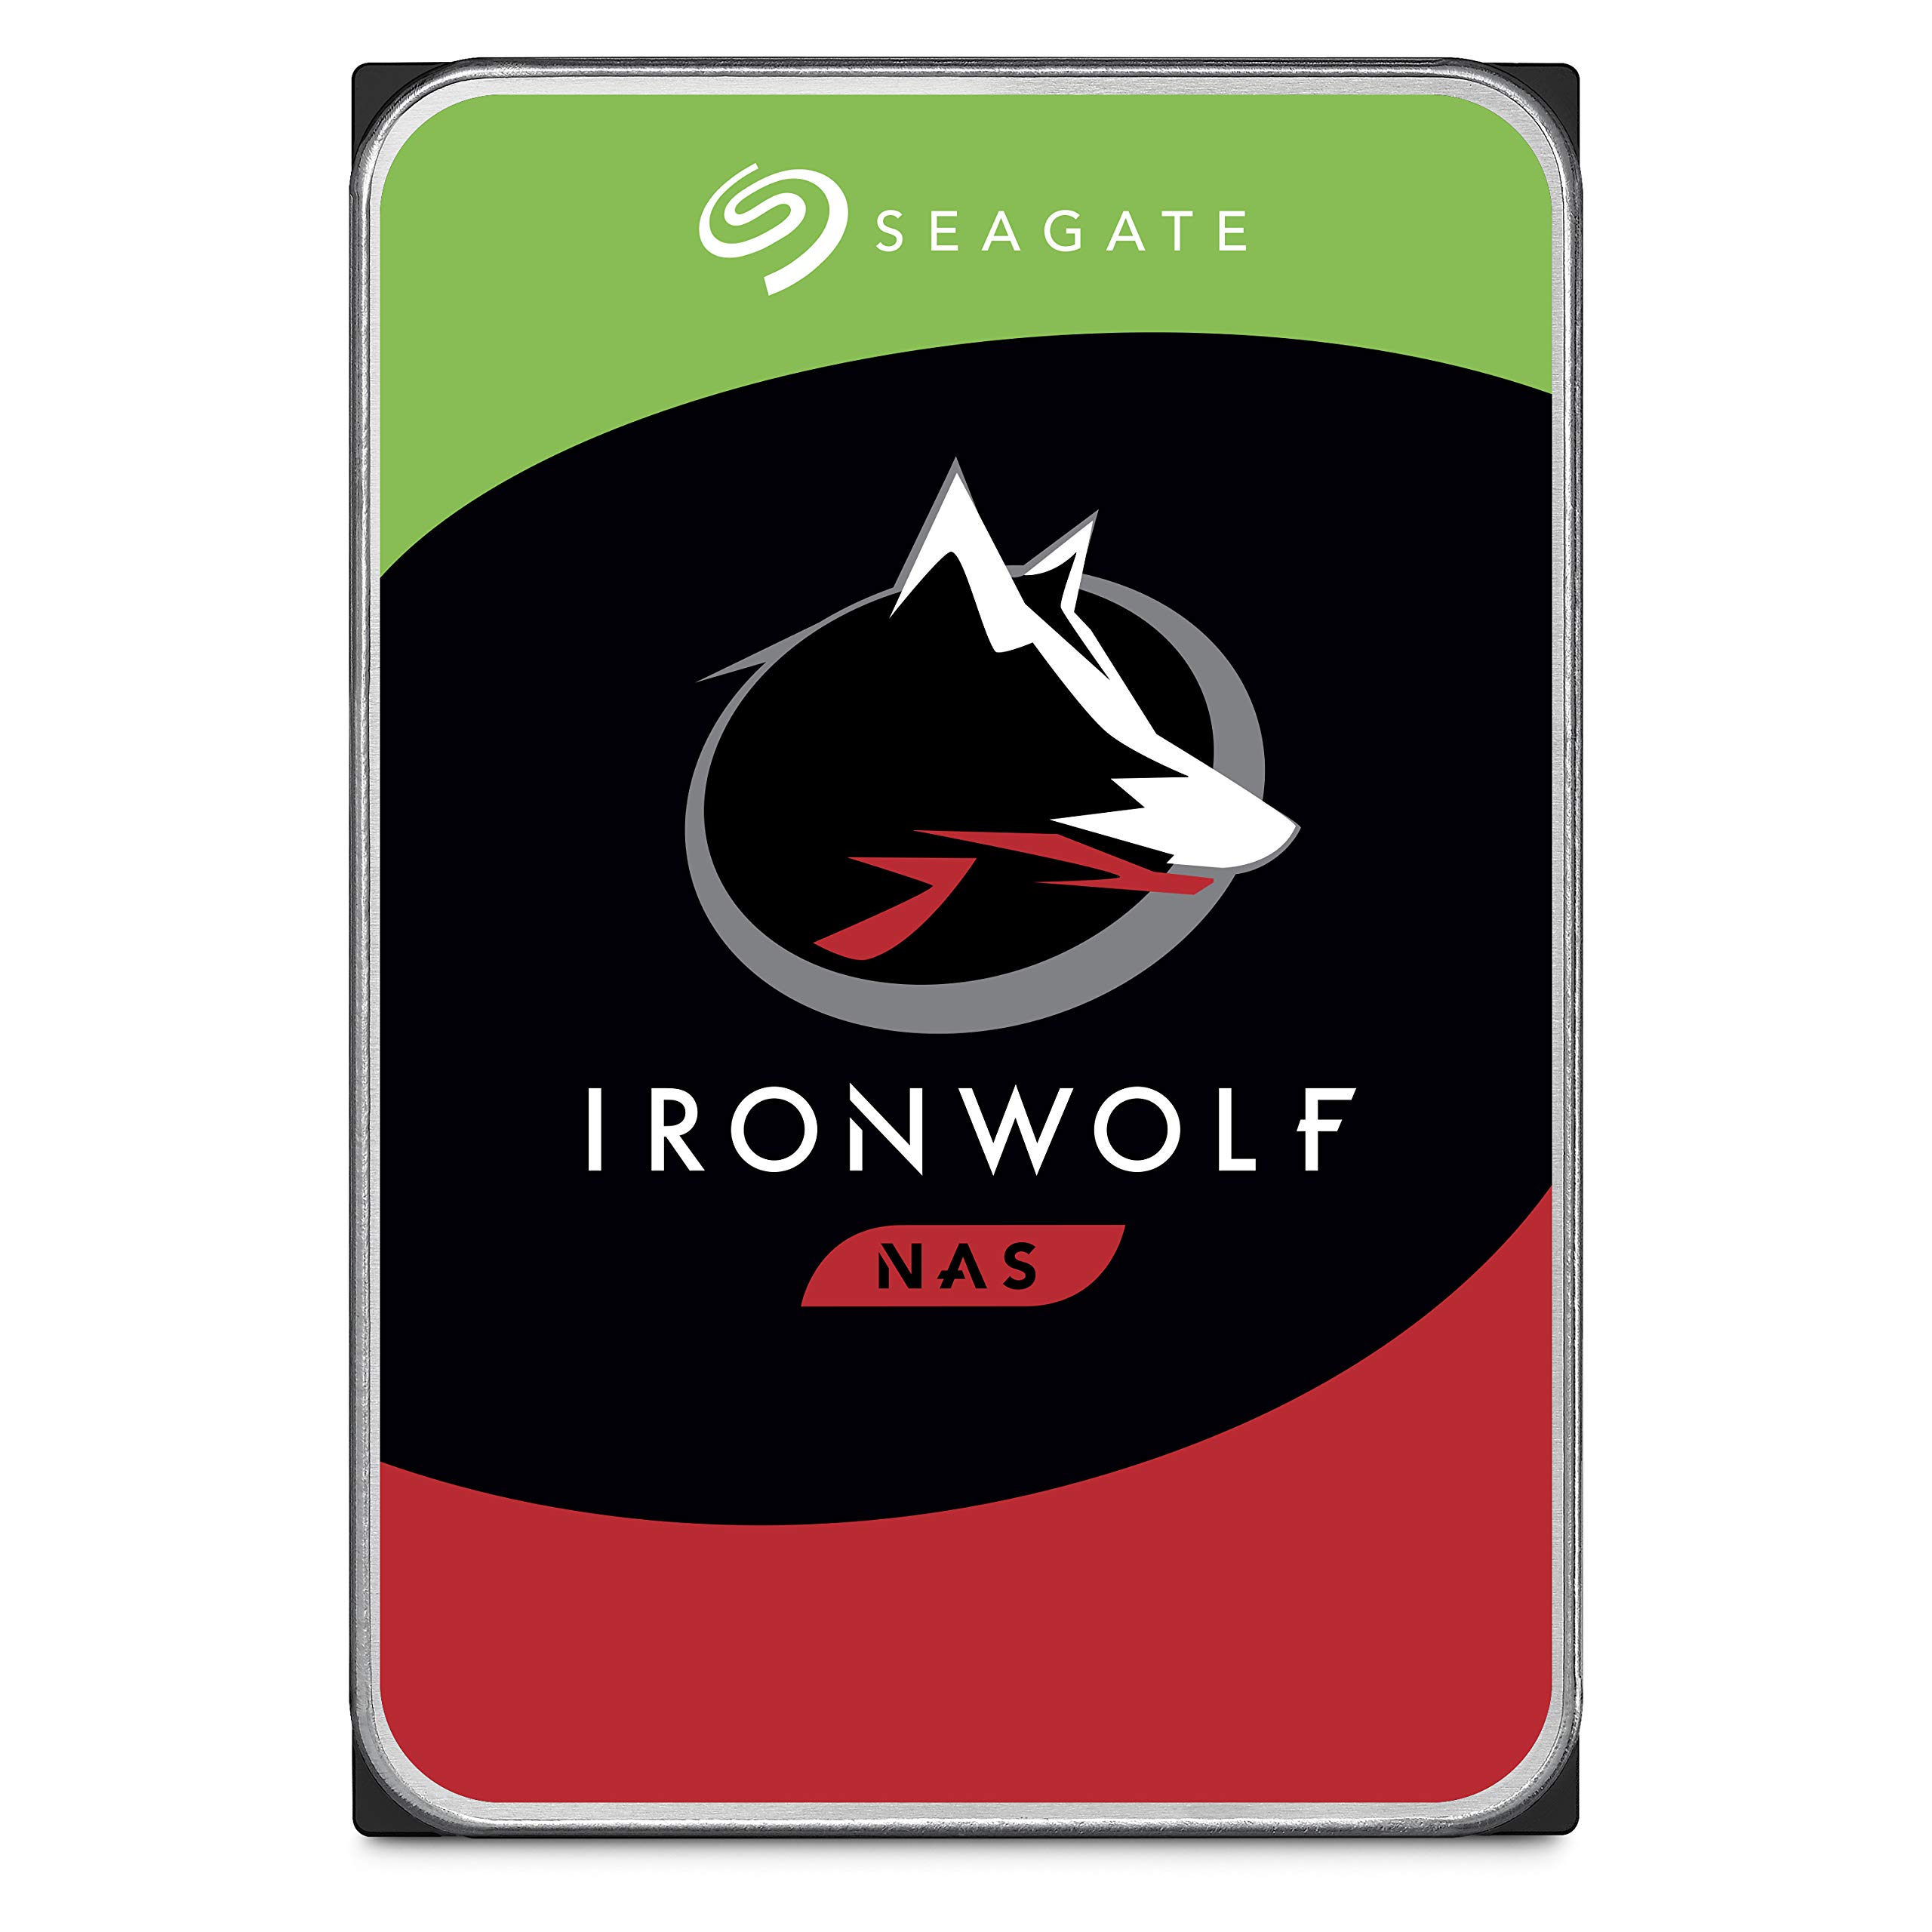 Seagate IronWolf 10Tb NAS Internal Hard Drive HDD – 3.5 Inch SATA 6GB/S 7200 RPM 256MB Cache for Raid Network Attached Storage (ST10000VN0004)